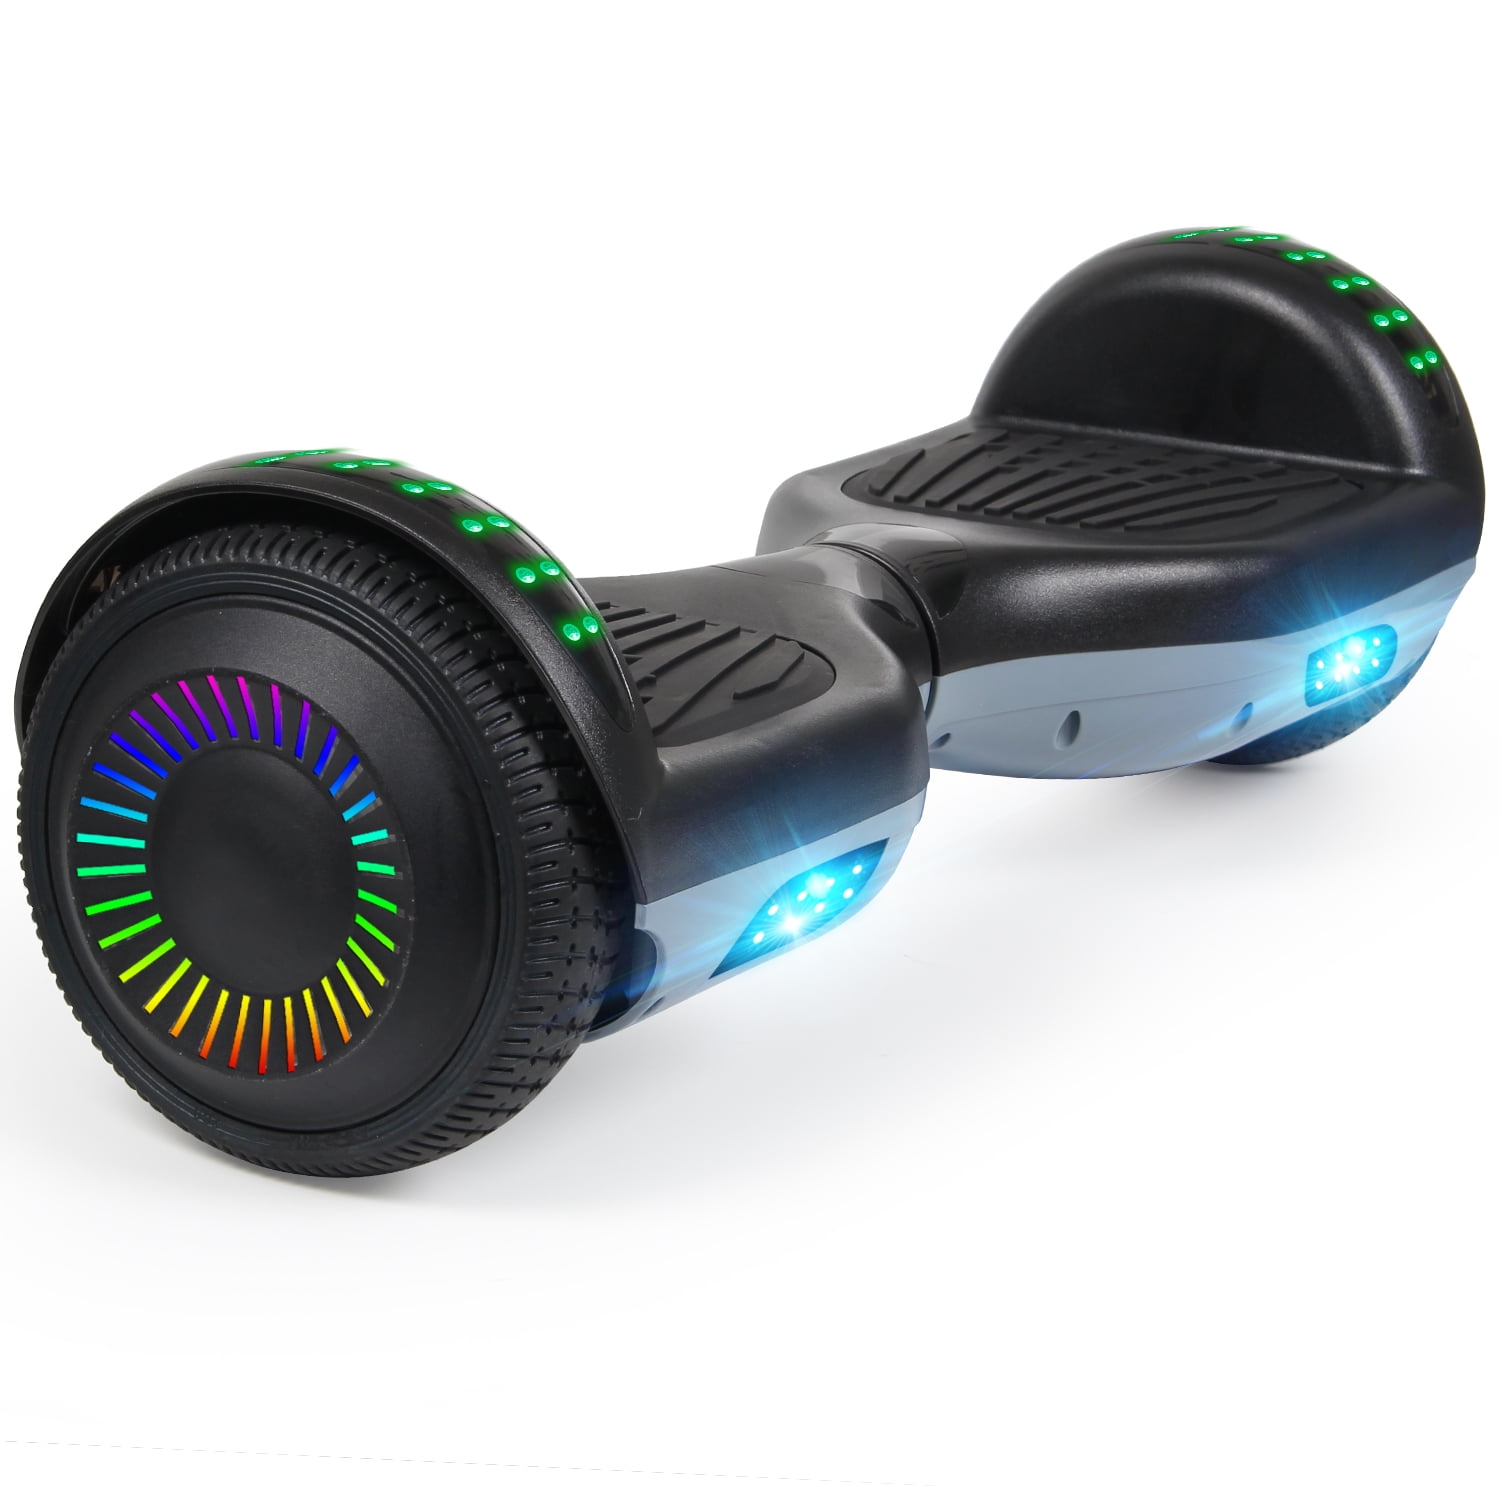 6.5" Bluetooth Hoverboard Electric Self Balancing Scooter no Bag Gift for Kids 